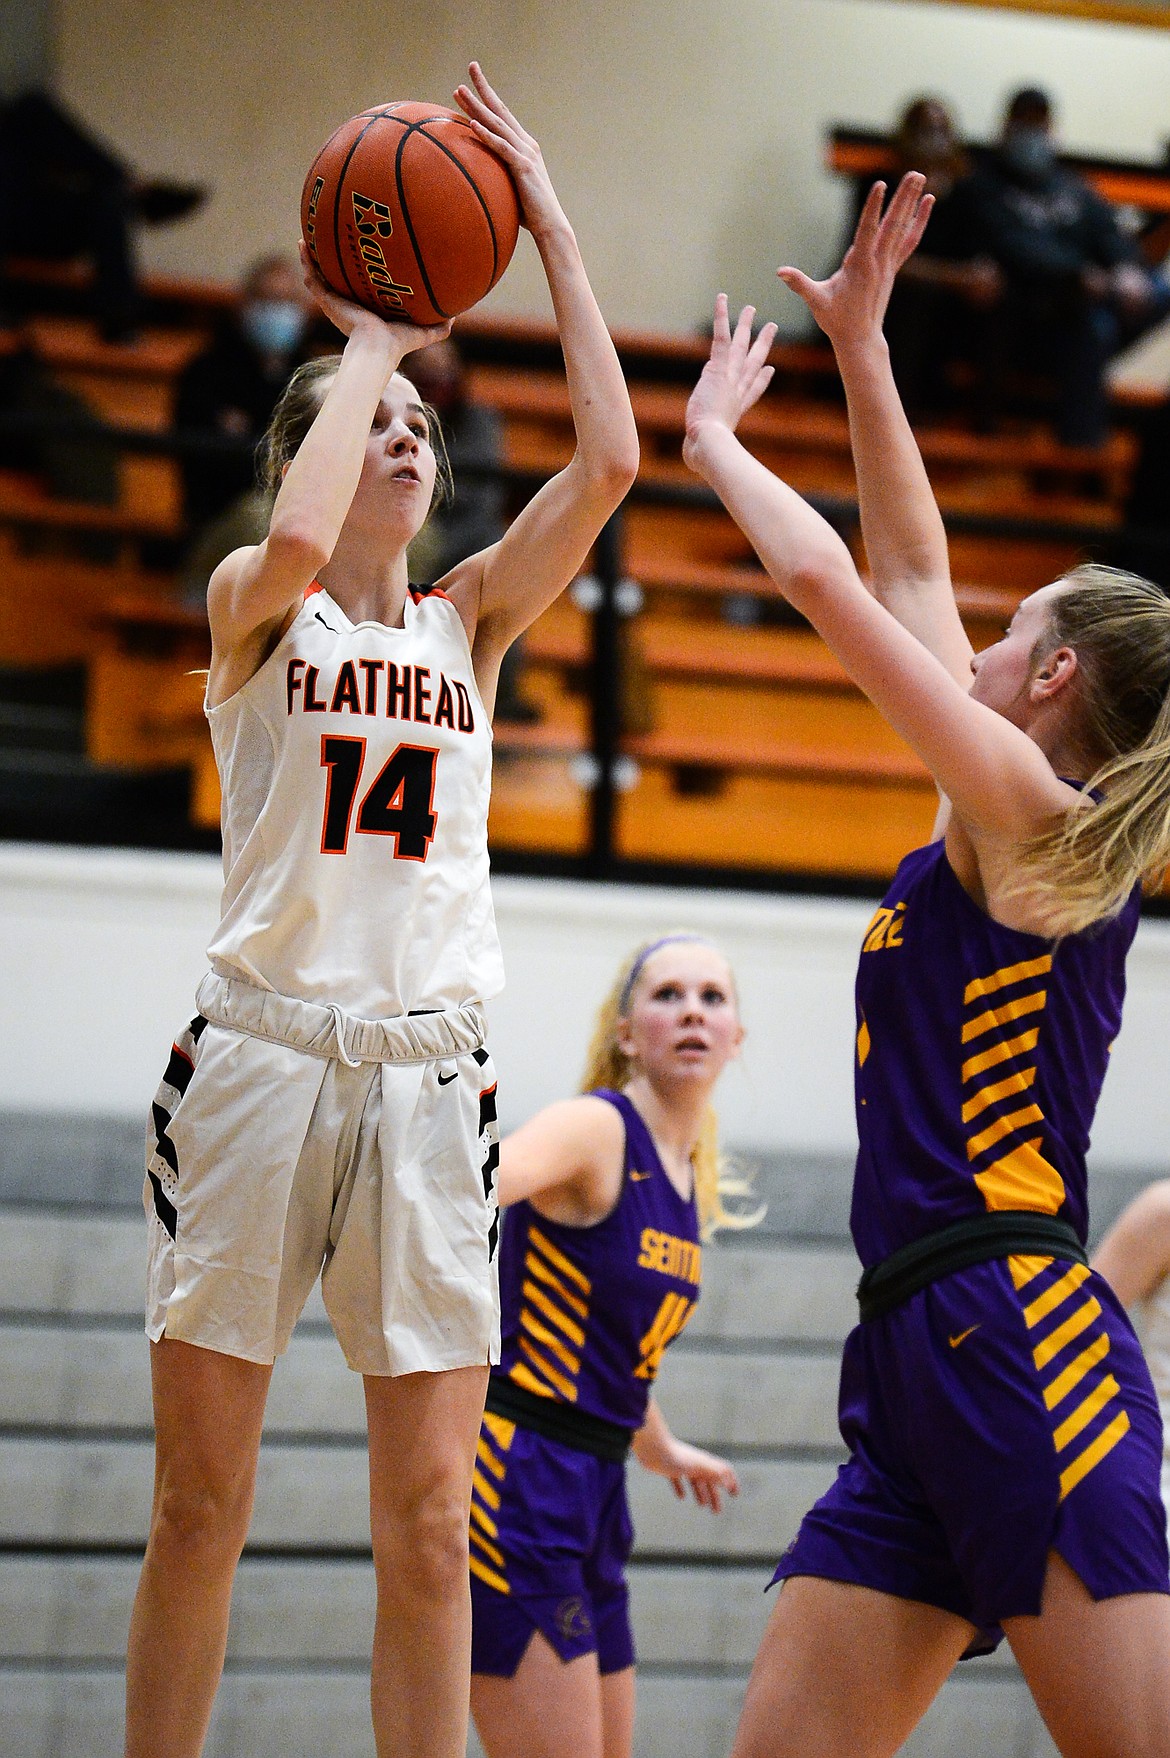 Flathead's Kennedy Moore (14) looks to shoot in the first half against Missoula Sentinel at Flathead High School on Thursday. (Casey Kreider/Daily Inter Lake)